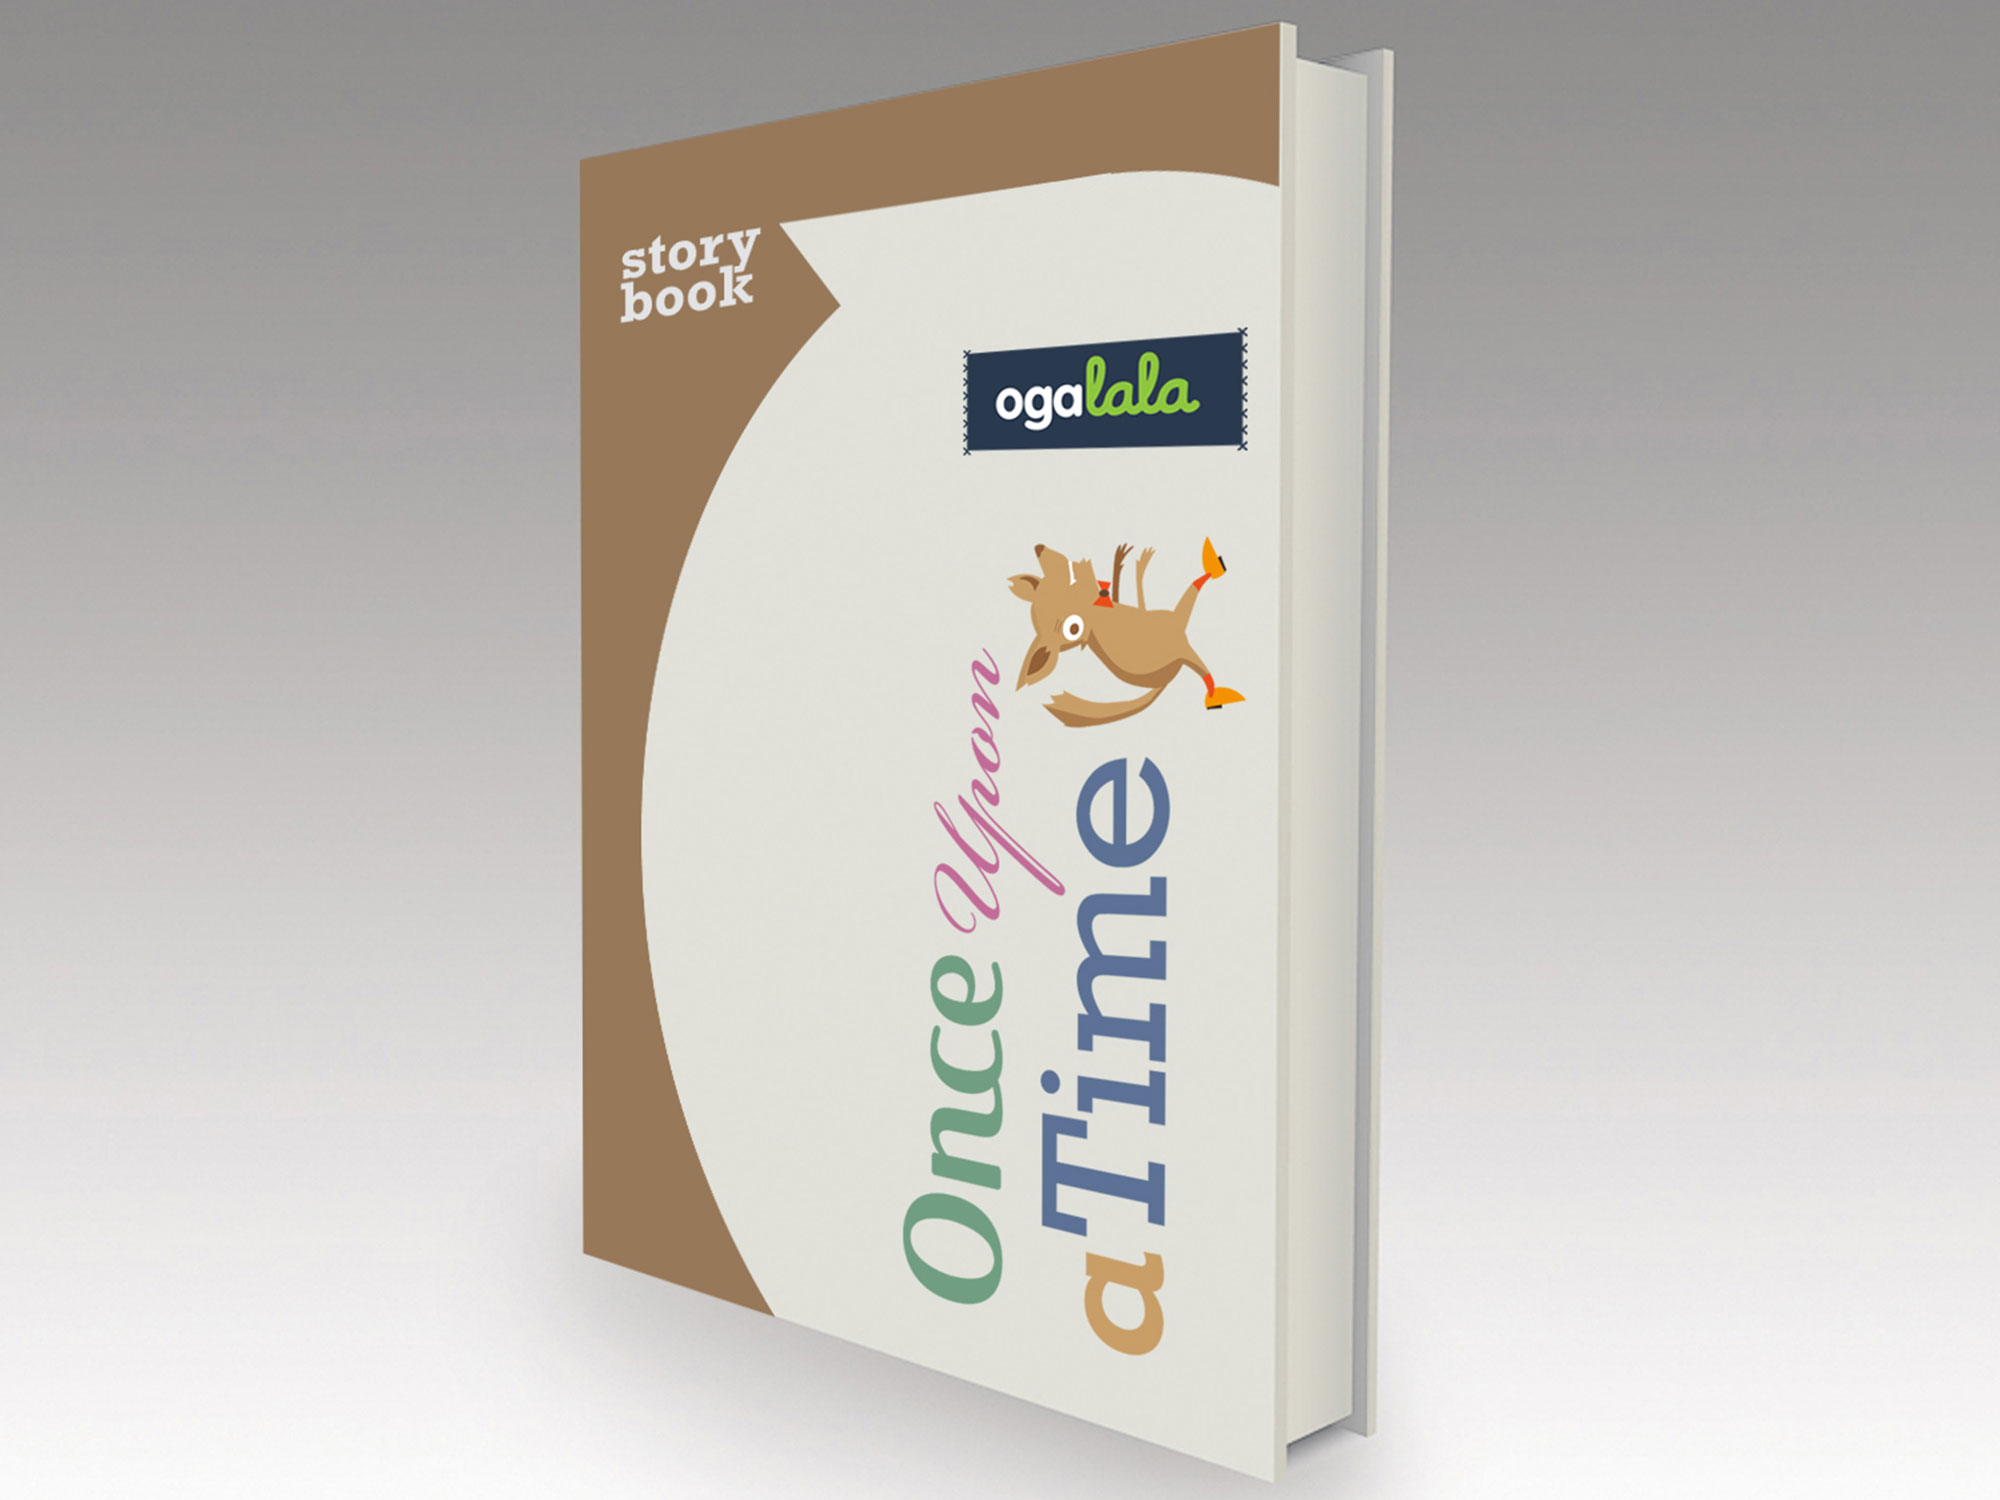 Brand Consultancy in Lifestyle Industry. Story book for Ogalala.